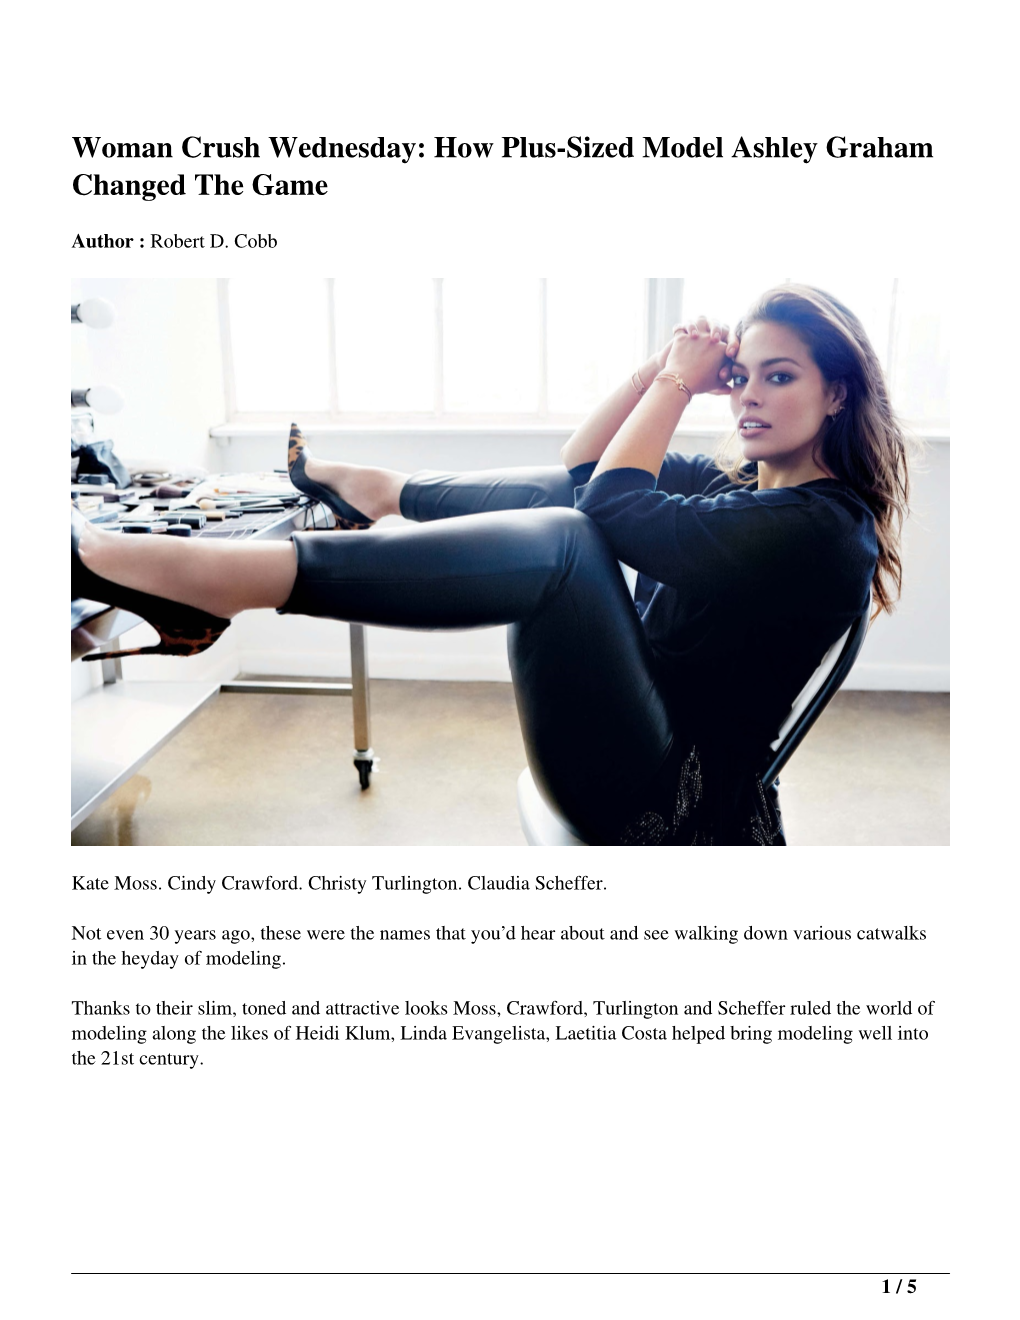 Woman Crush Wednesday: How Plus-Sized Model Ashley Graham Changed the Game